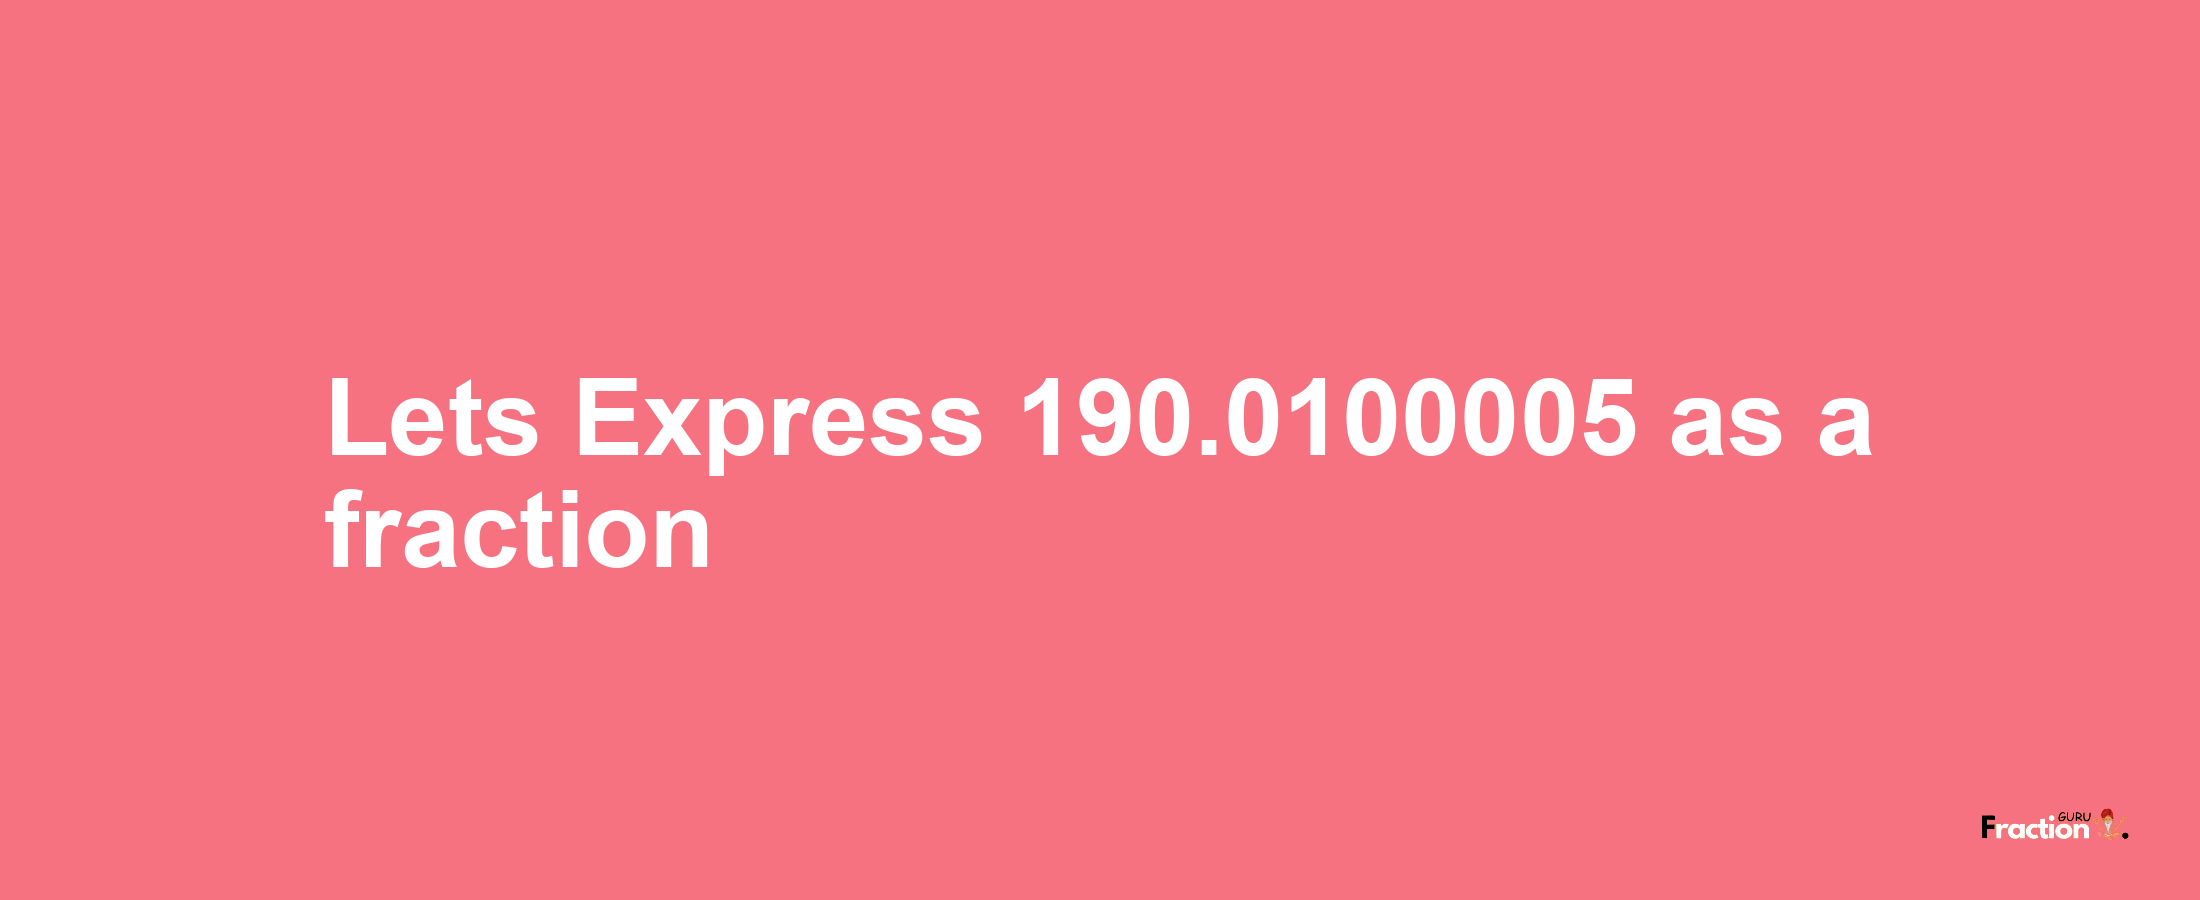 Lets Express 190.0100005 as afraction